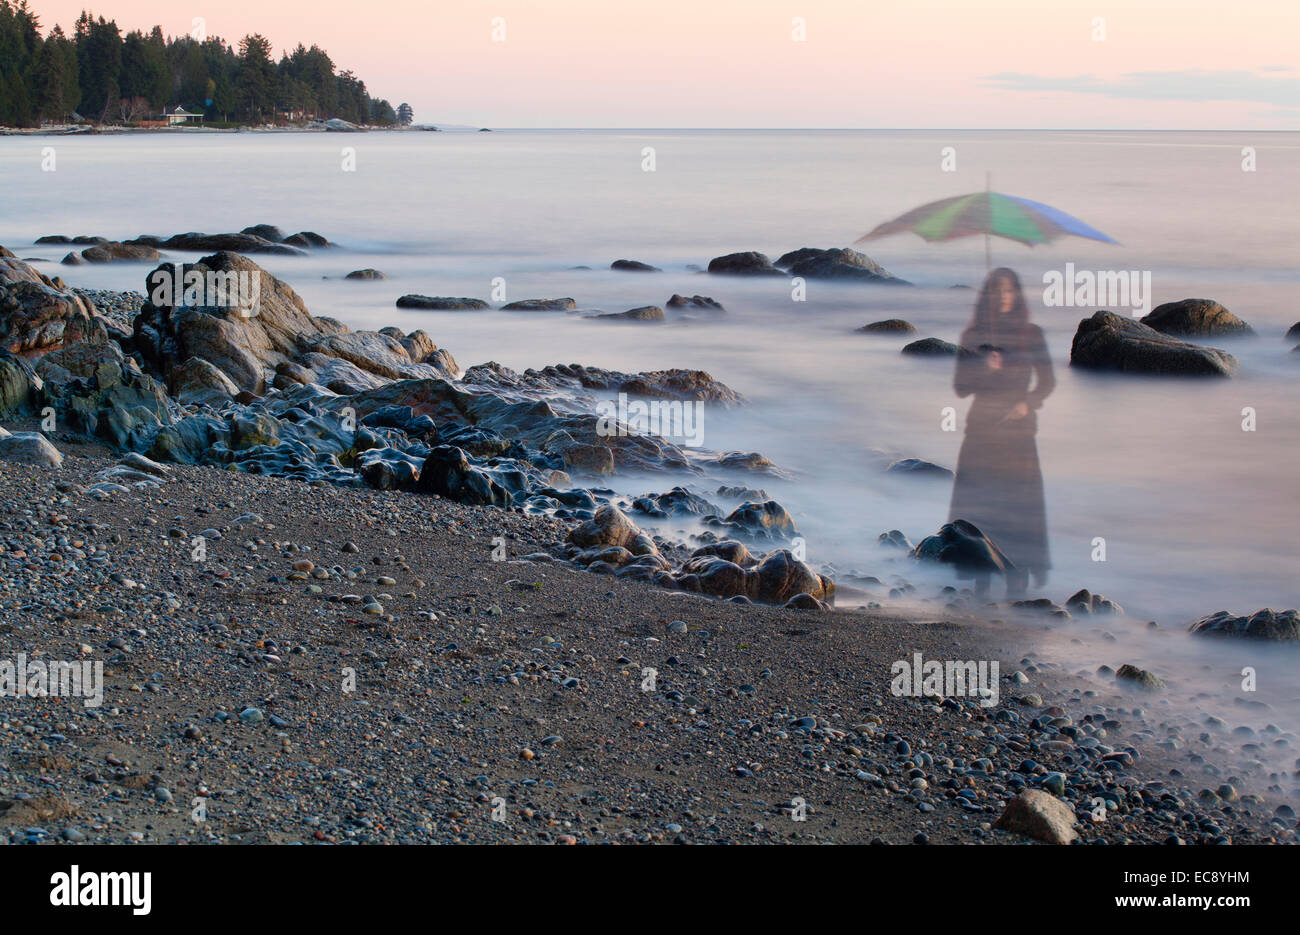 Long exposure of a ghostly image of woman with umbrella on the beach in Sechelt, BC, Canada Stock Photo